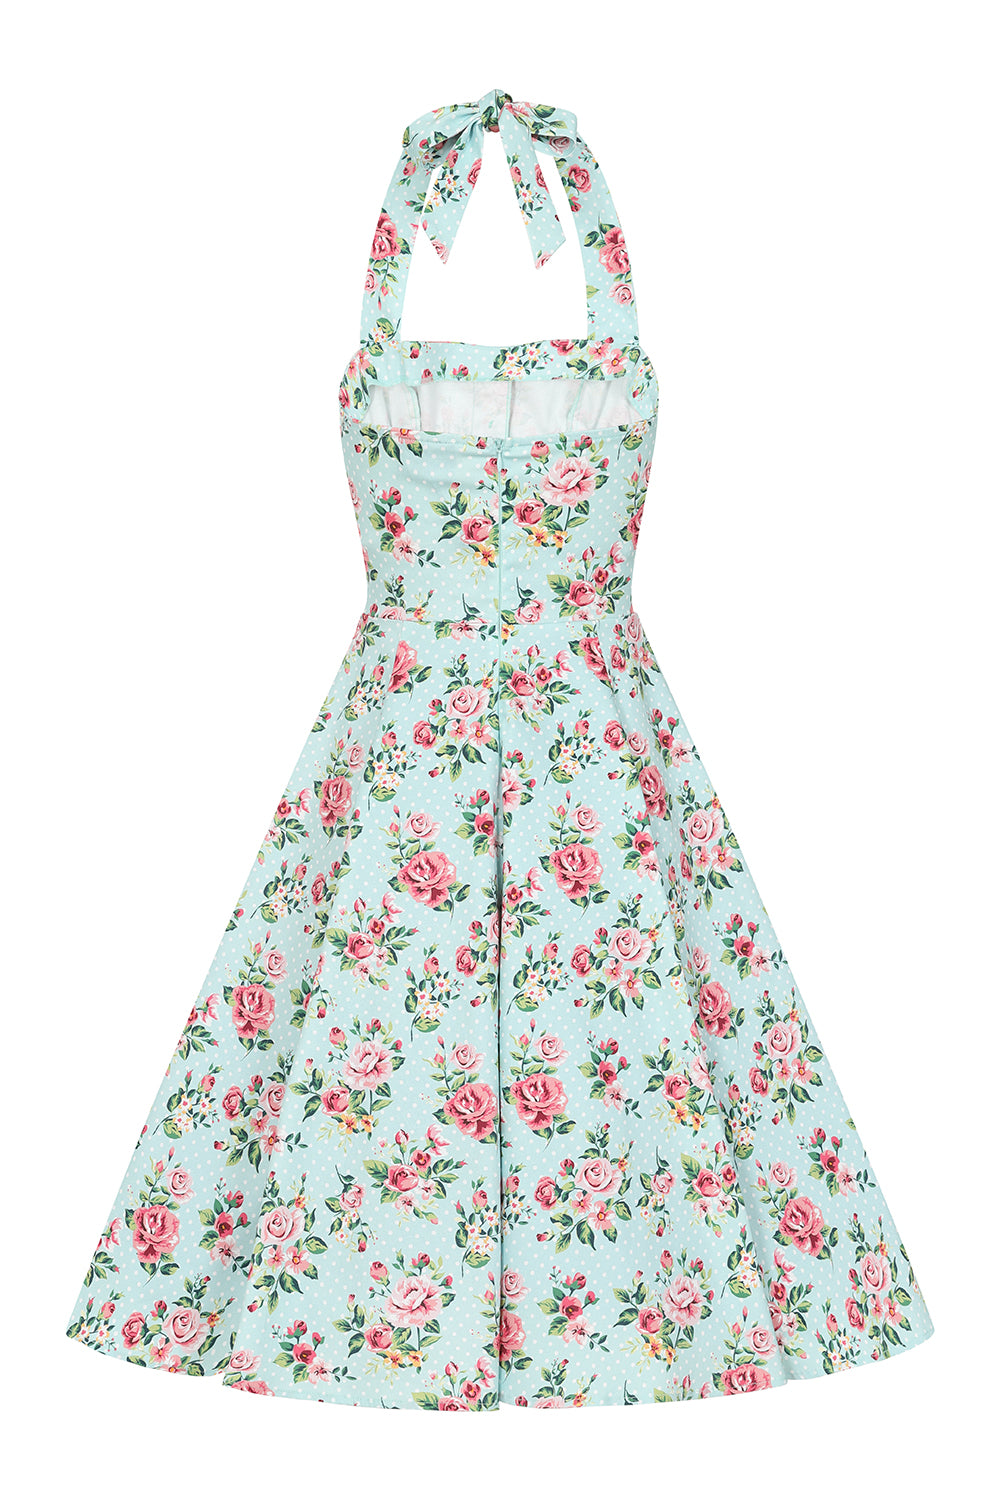 Heidi Floral Swing Dress by Hearts & Roses London